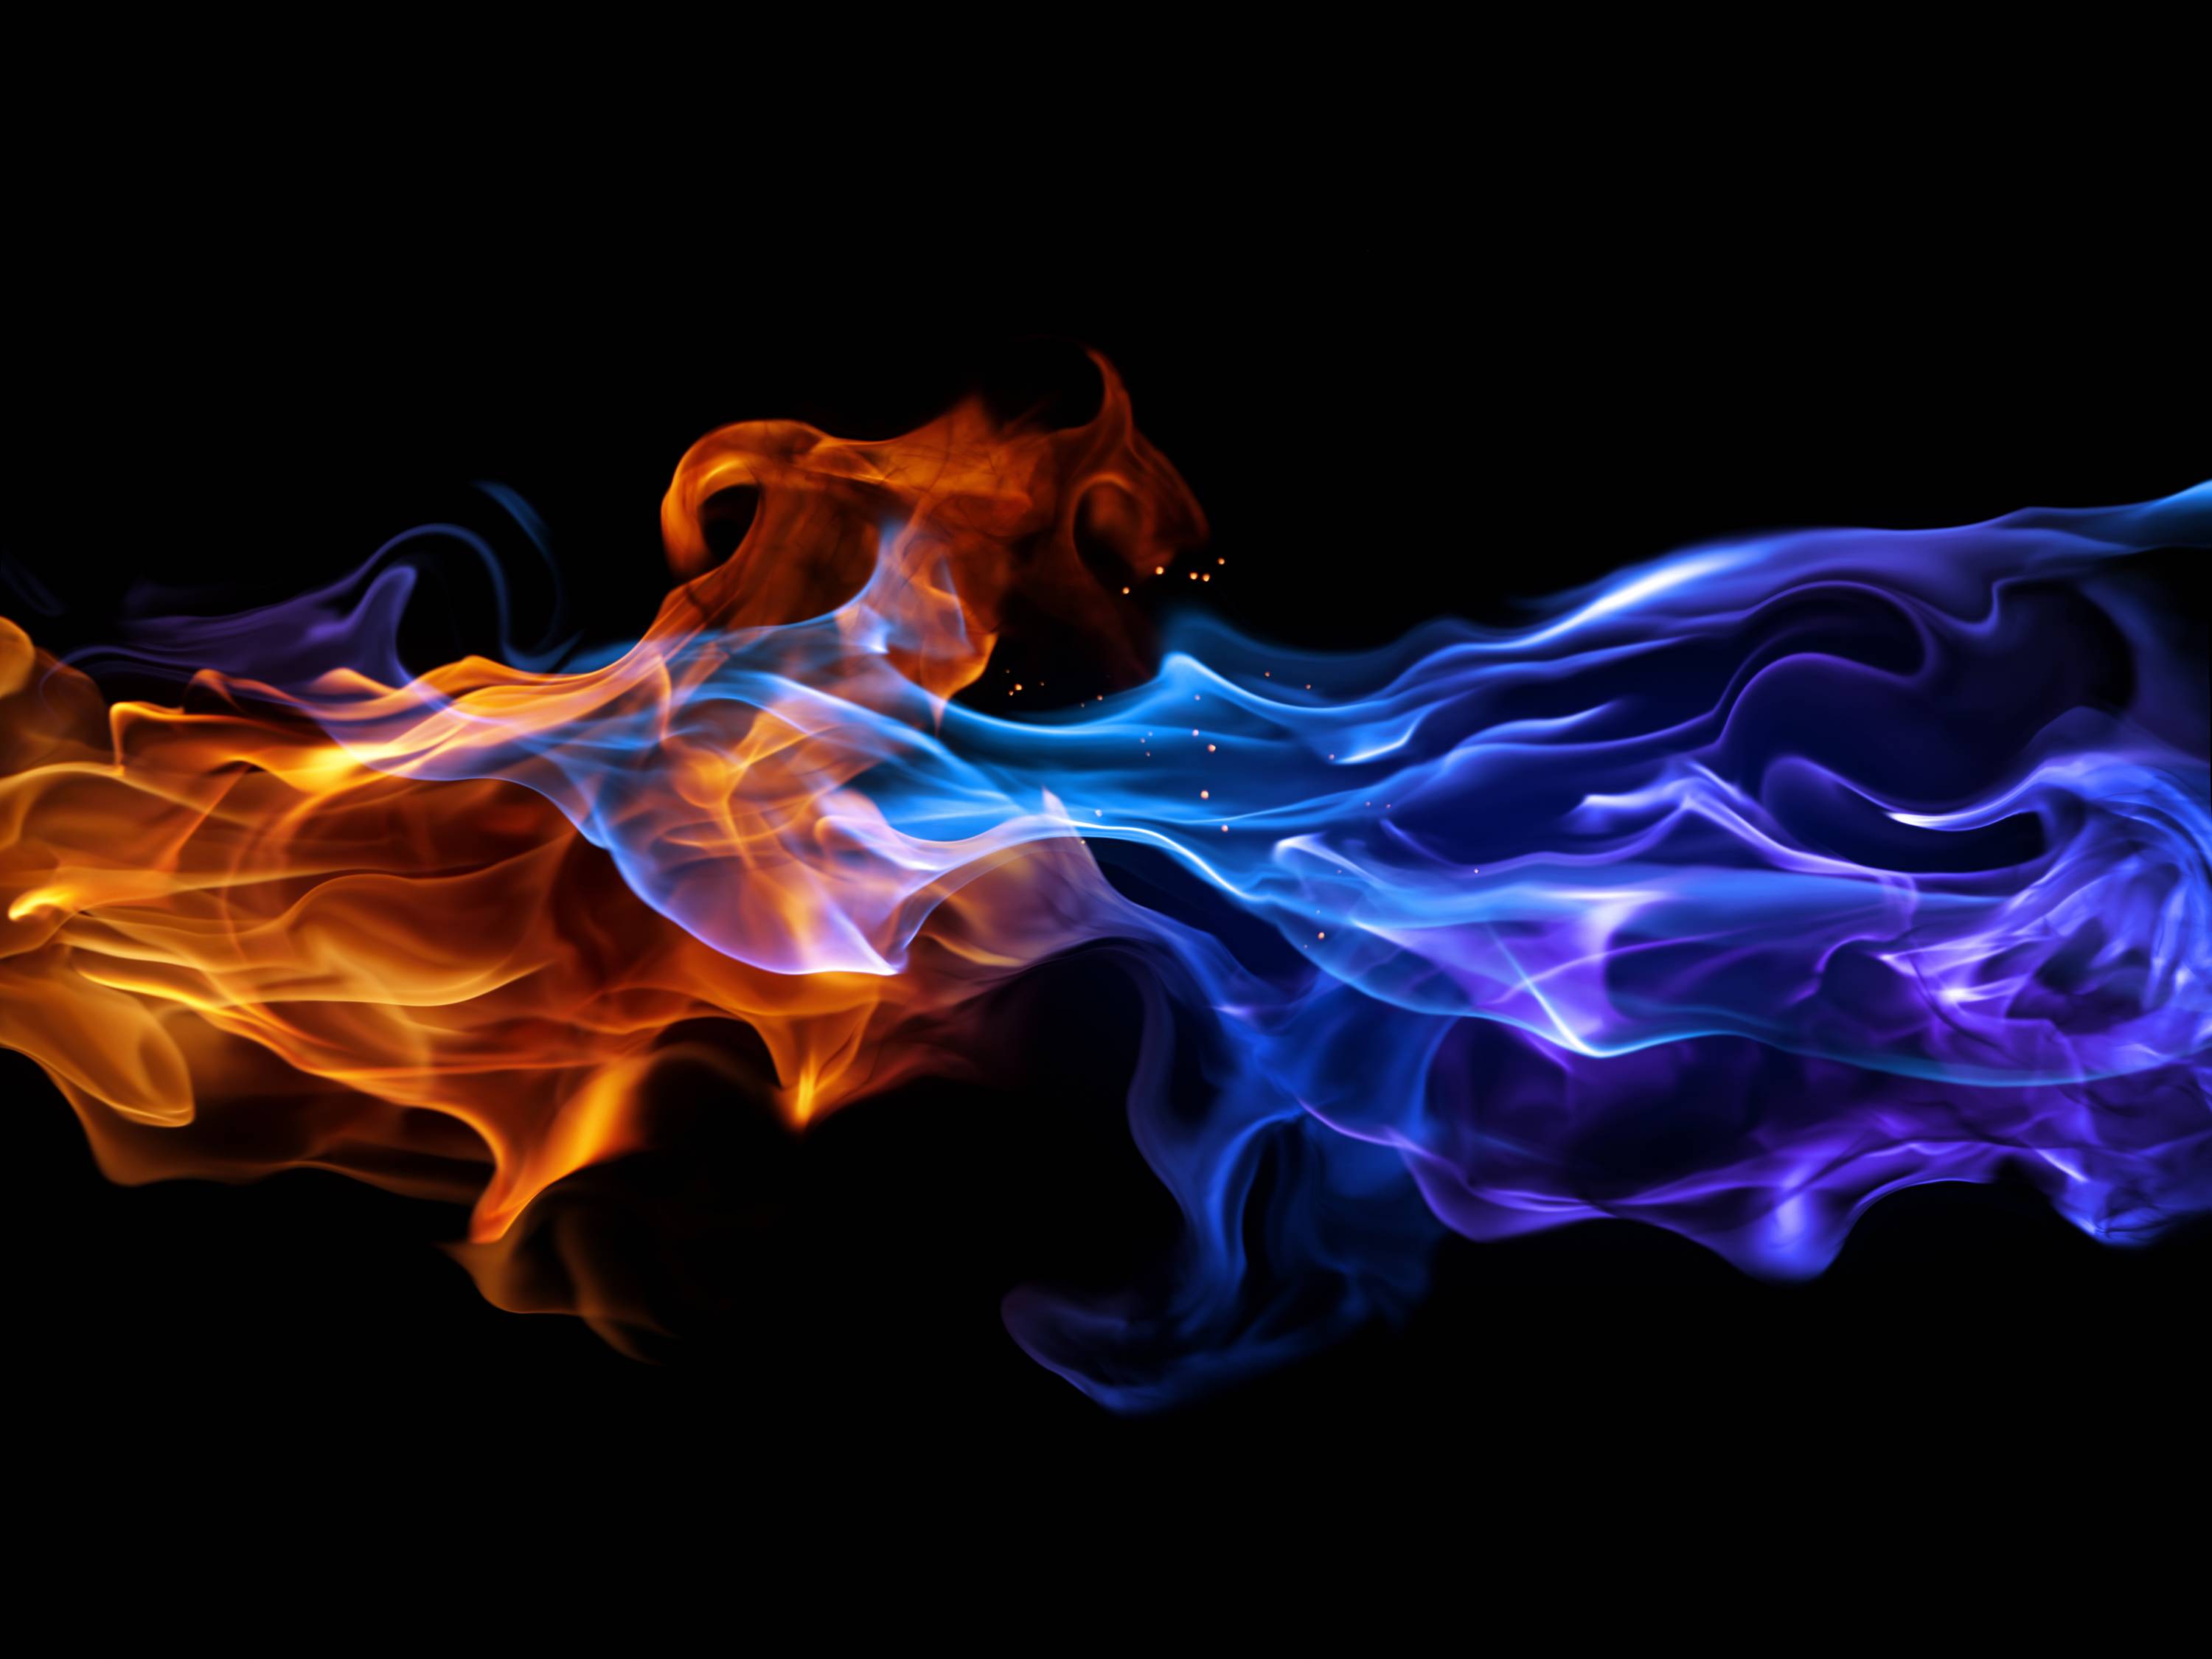 Abstract Fire Wallpaper HD Desktop Red And Blue Flames